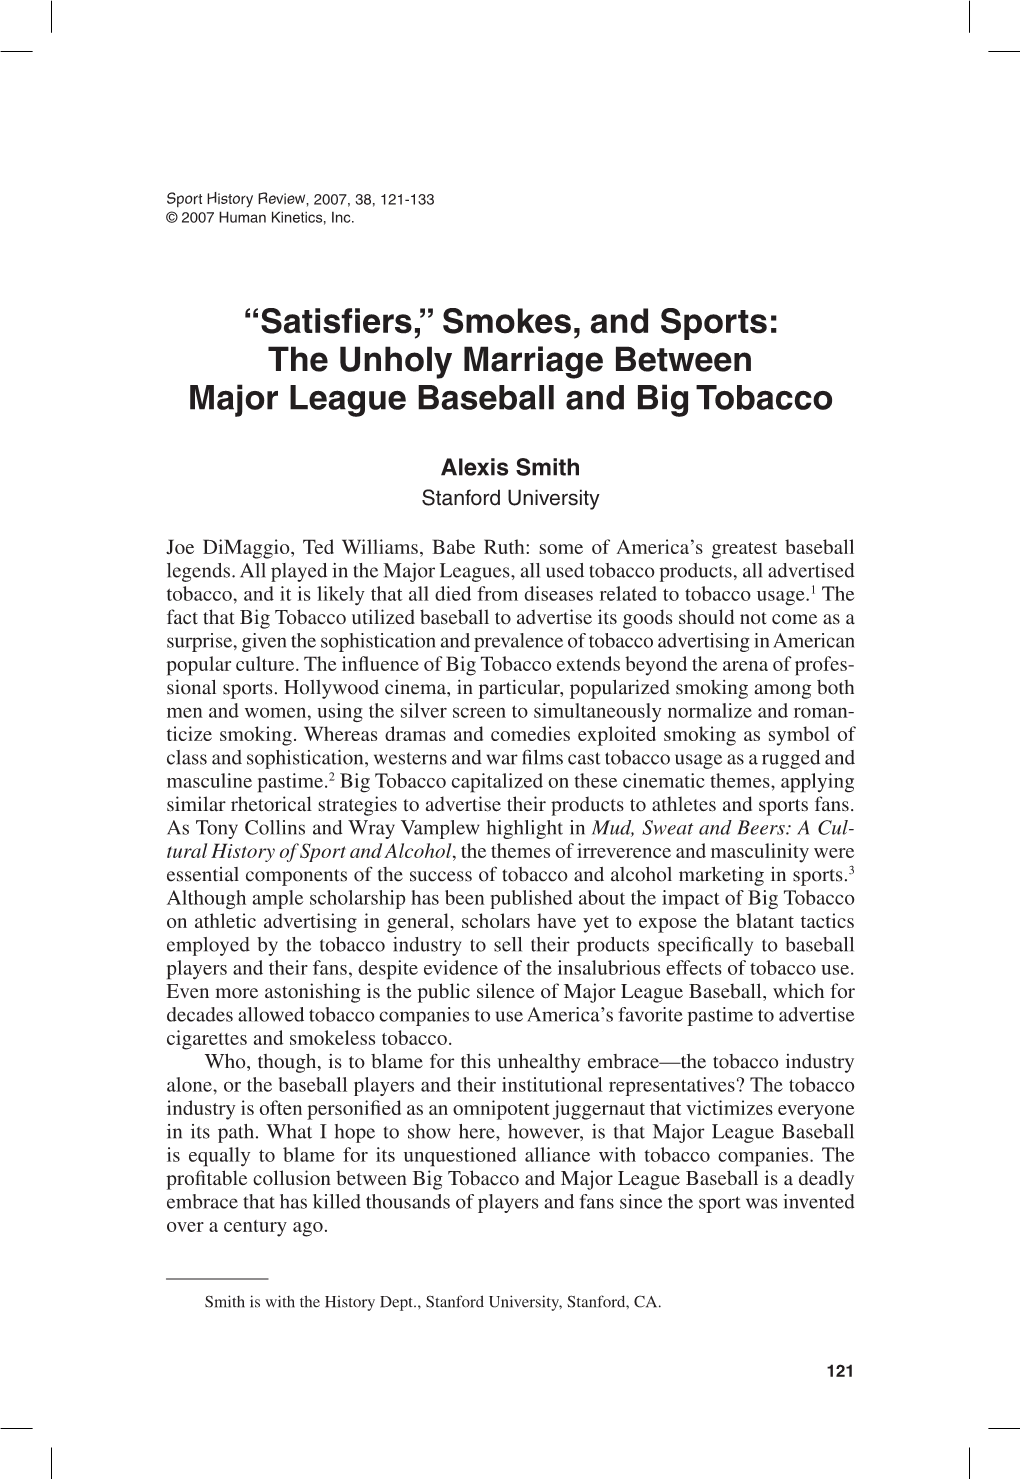 The Unholy Marriage Between Major League Baseball and Big Tobacco